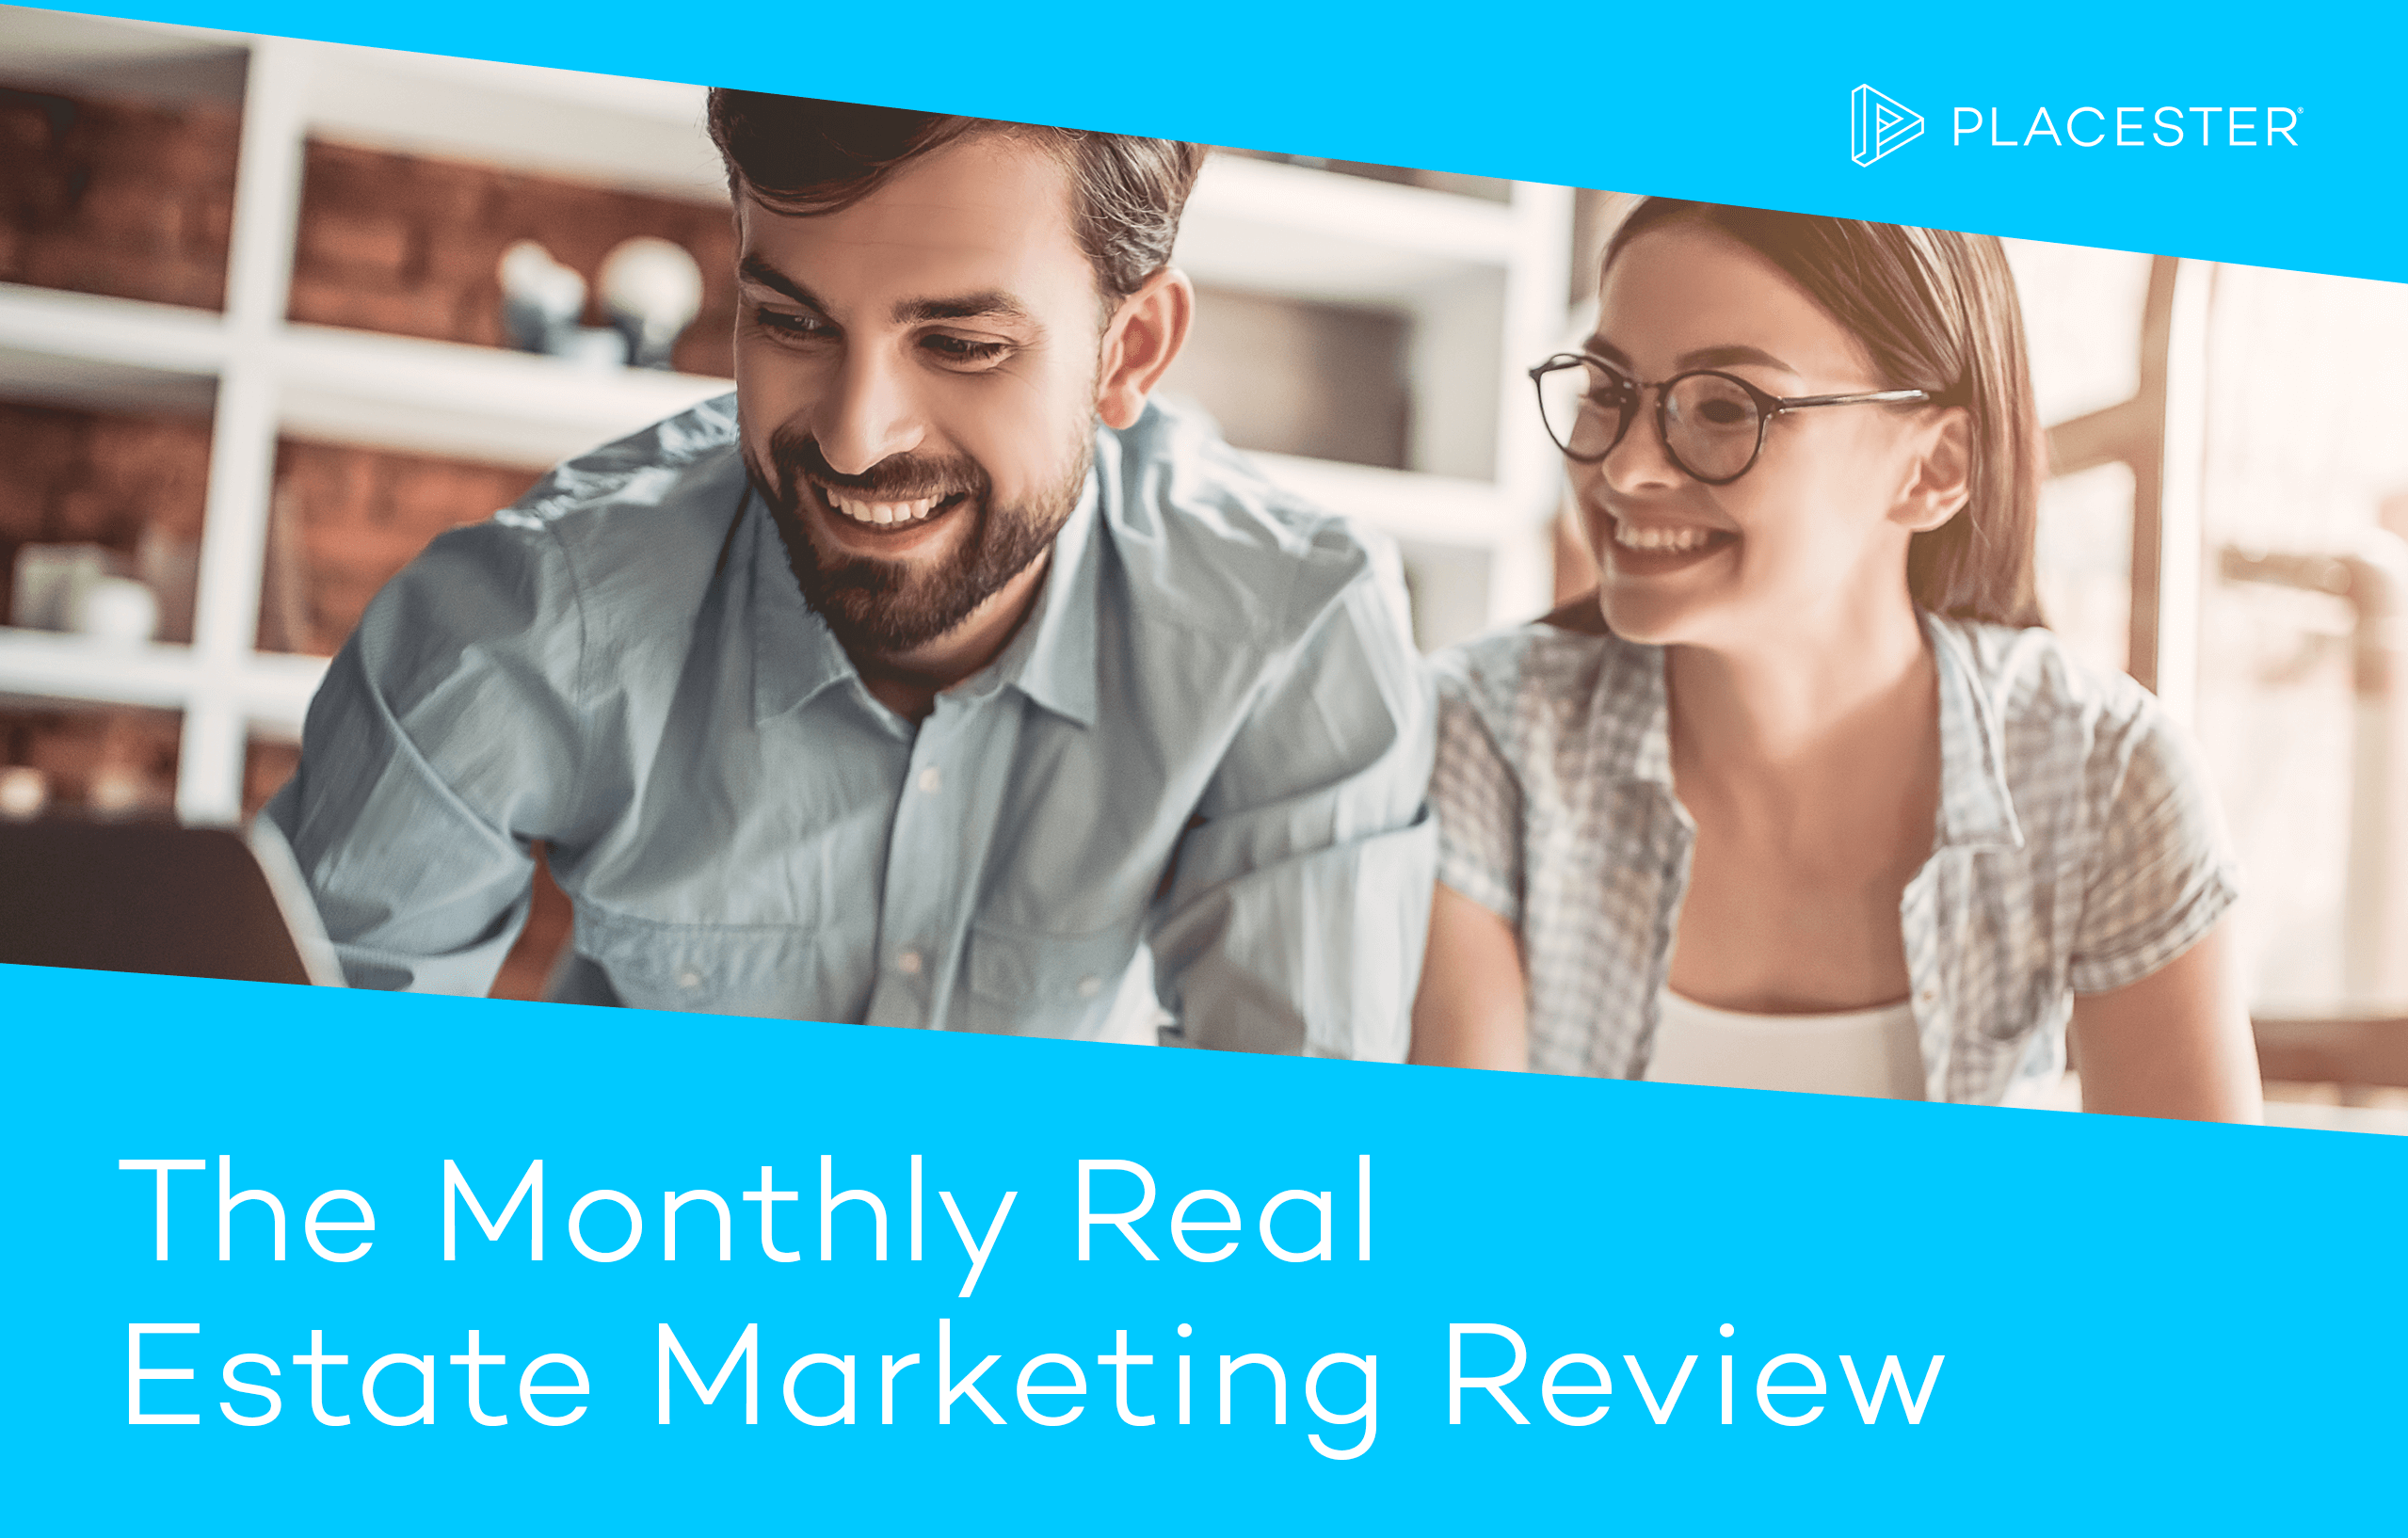 Monthly Real Estate Marketing Review: REAL Trends Rankings, SEO Study, and More